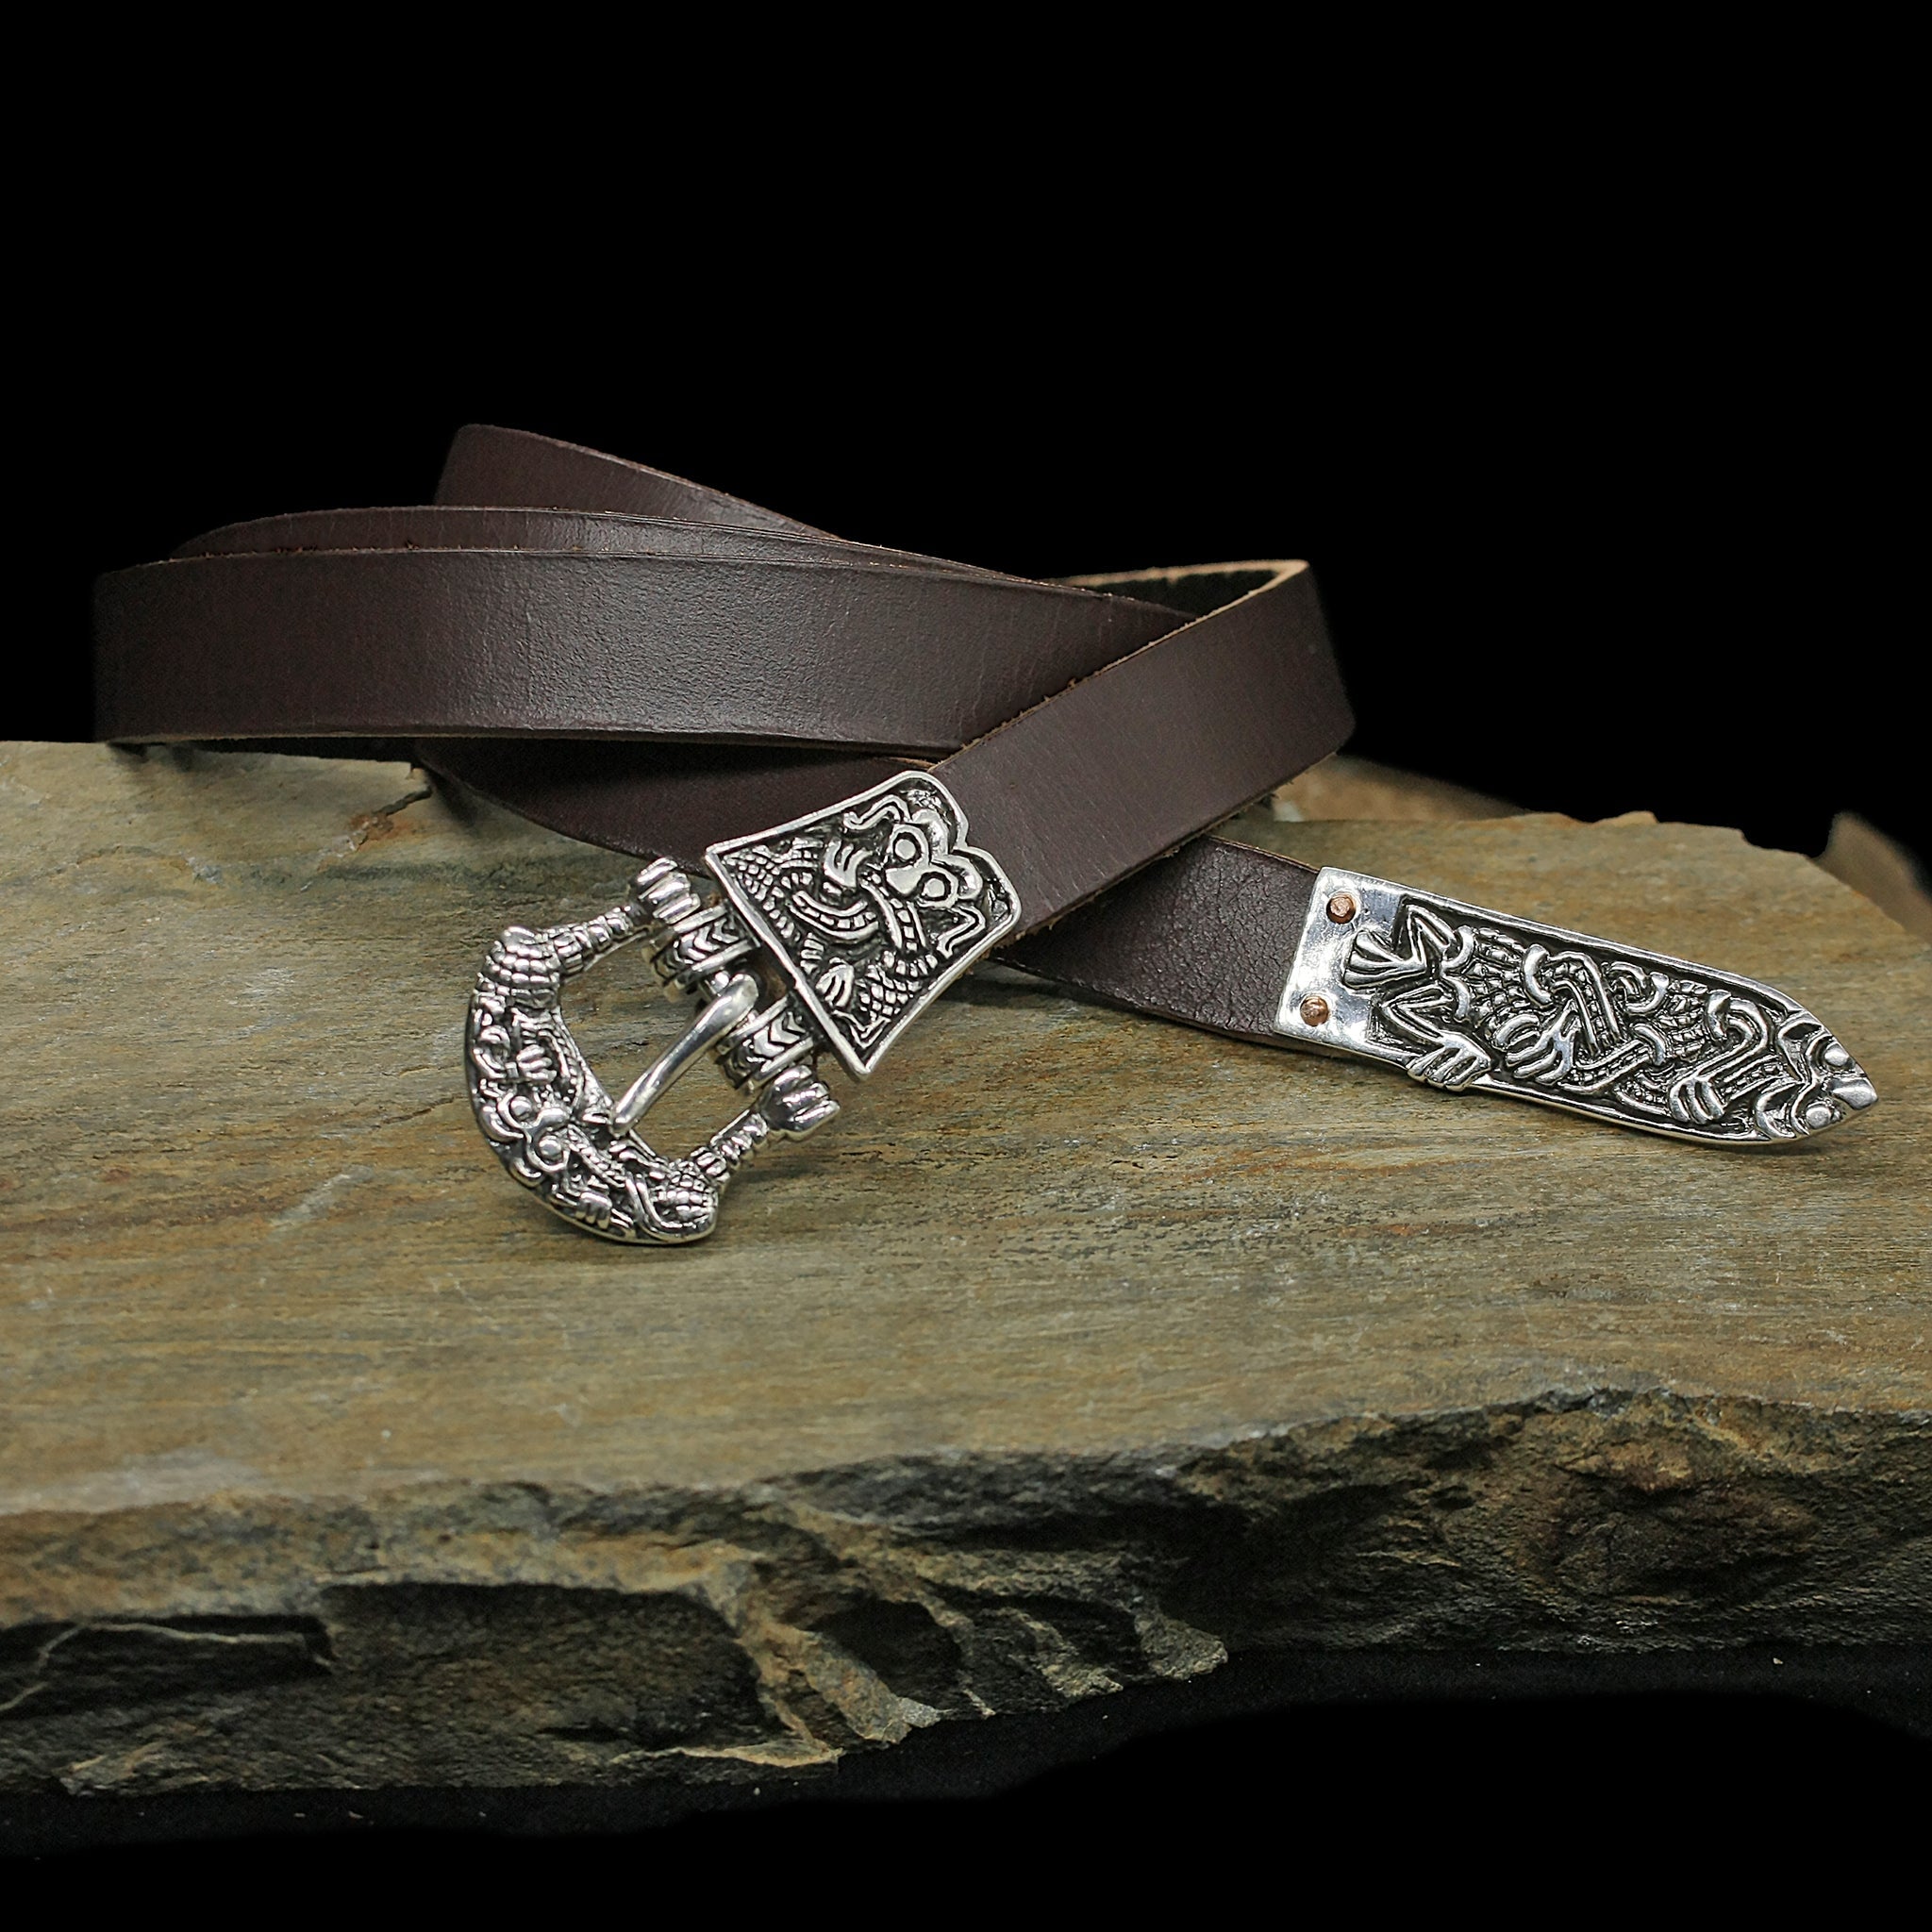 High status Viking belt with silver gripping beast fittings and brown leather strap